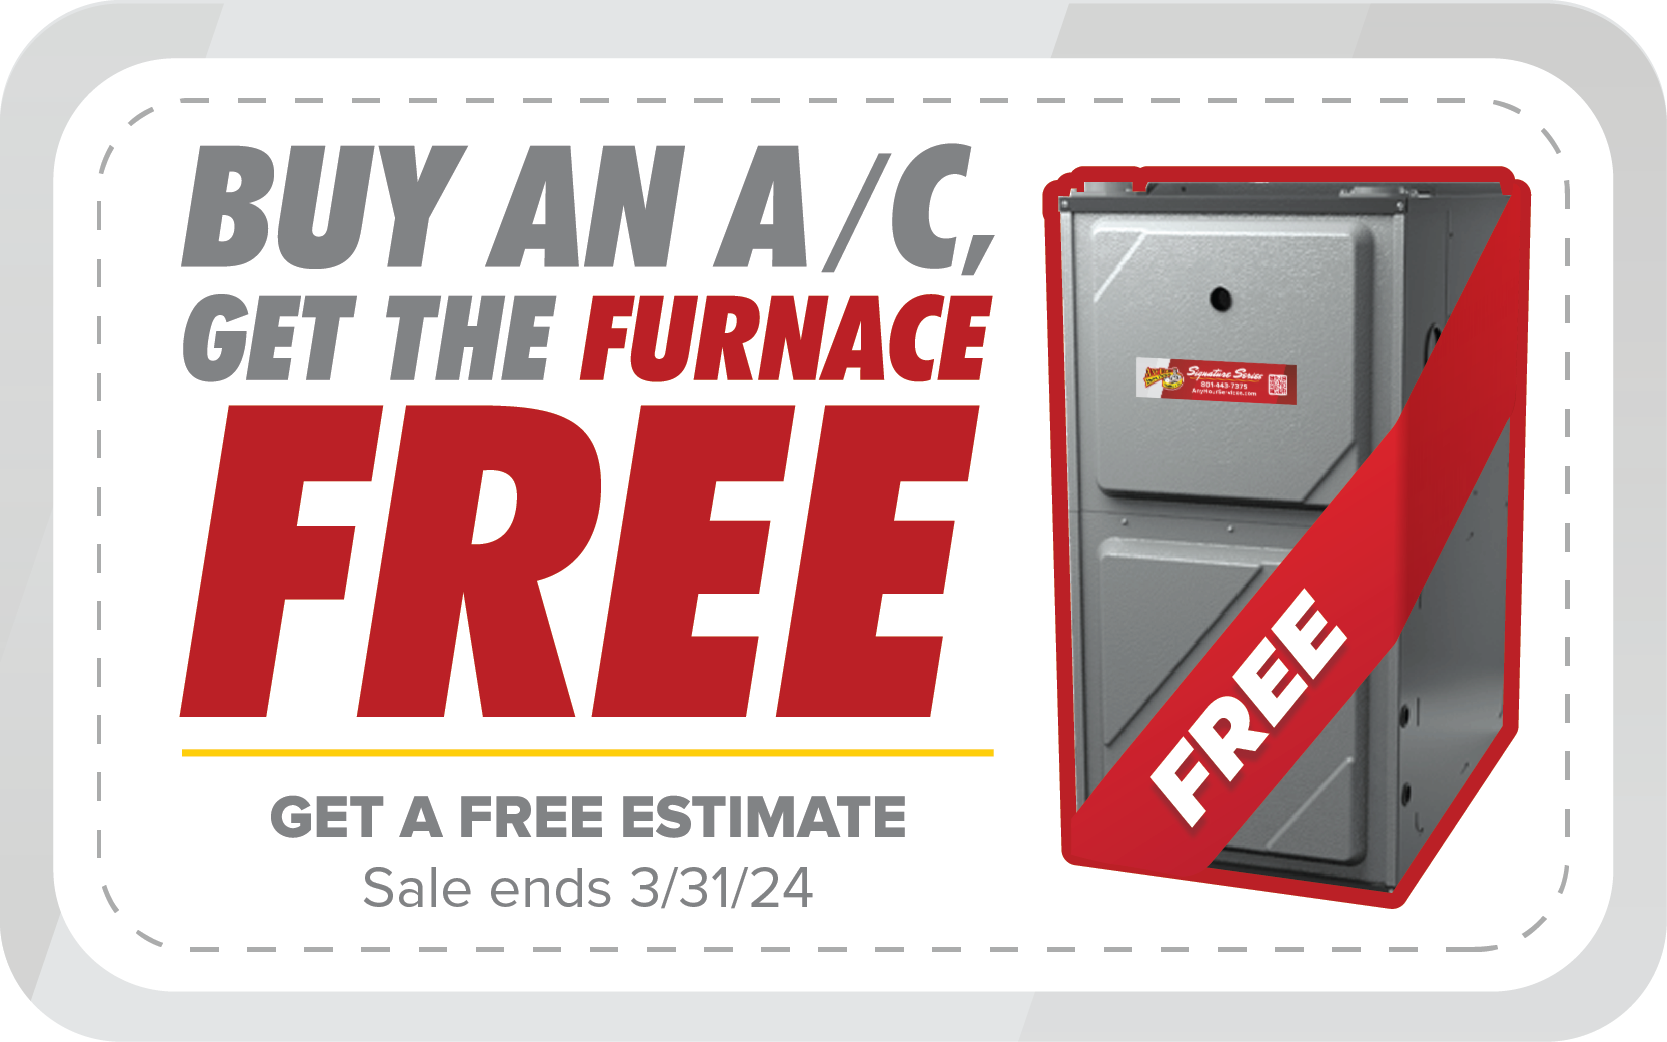 Buy an AC, get a new furnace for FREE!